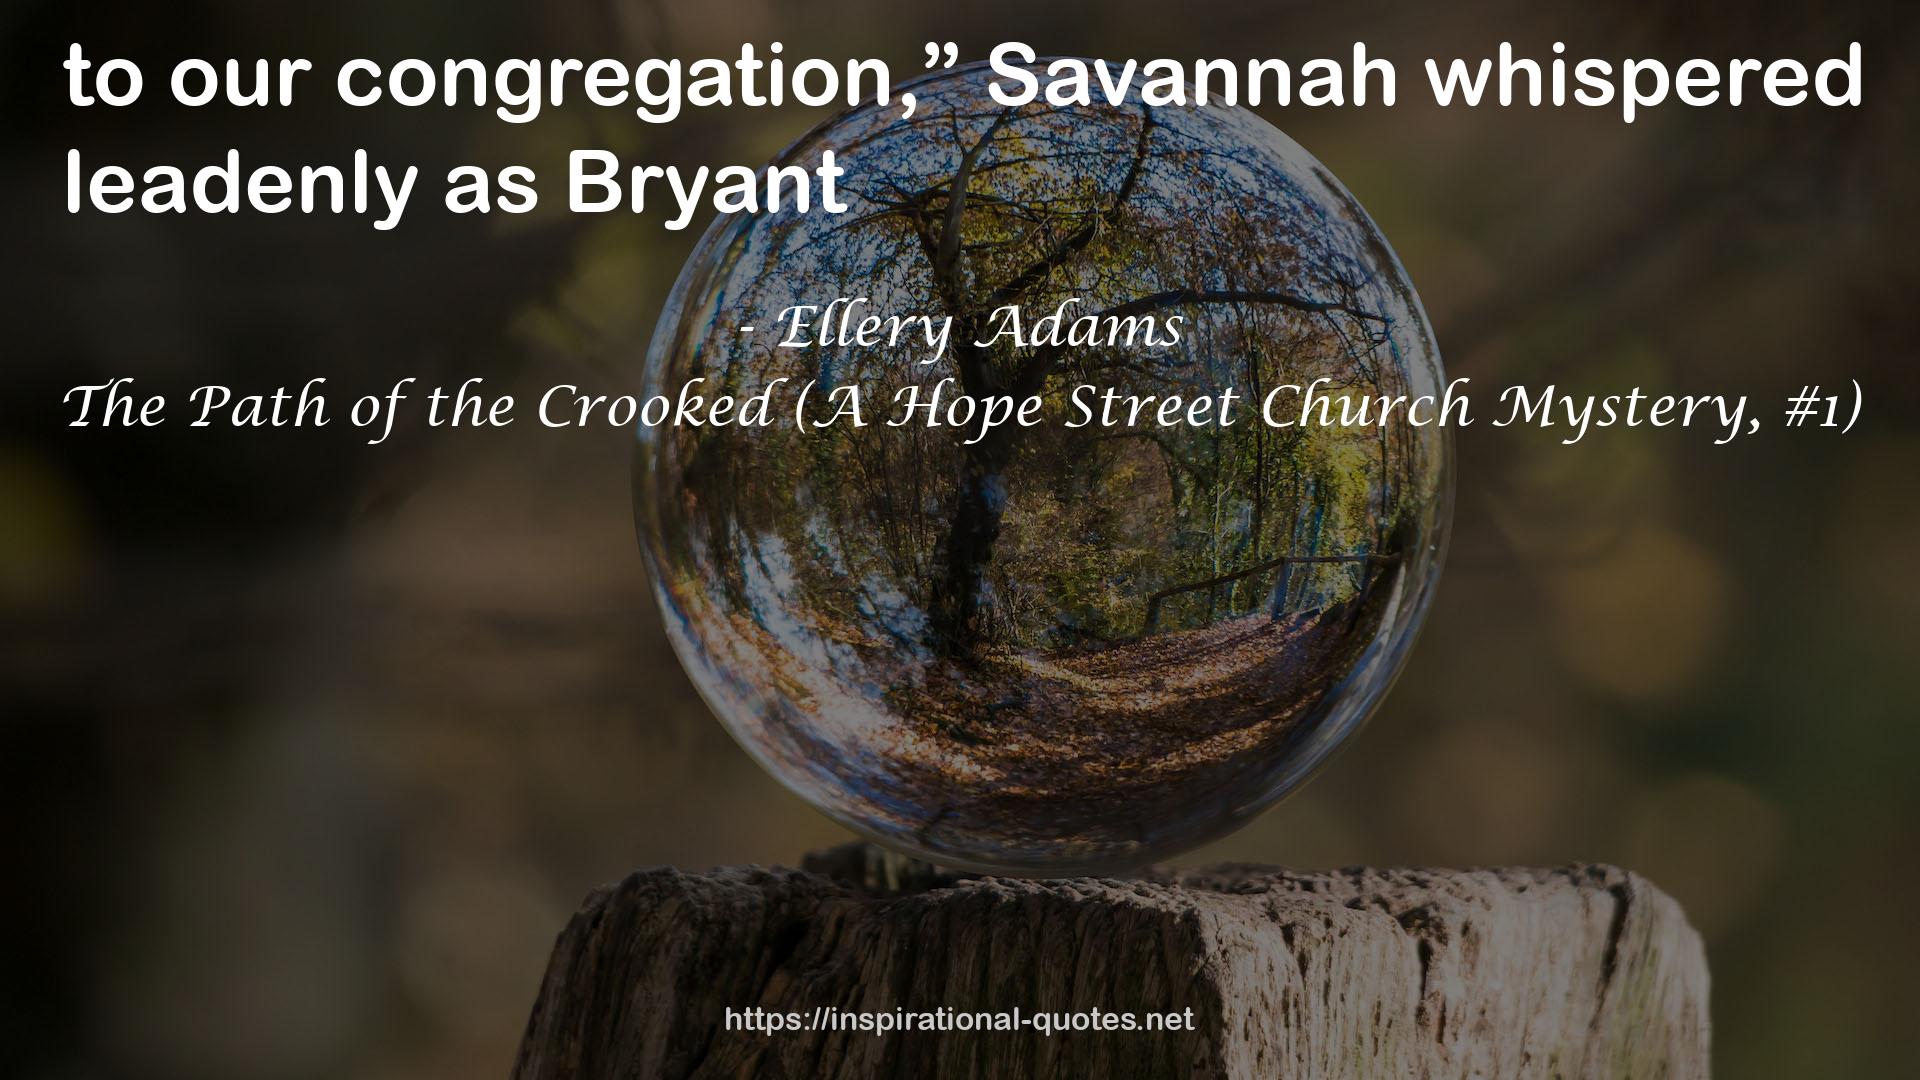 The Path of the Crooked (A Hope Street Church Mystery, #1) QUOTES